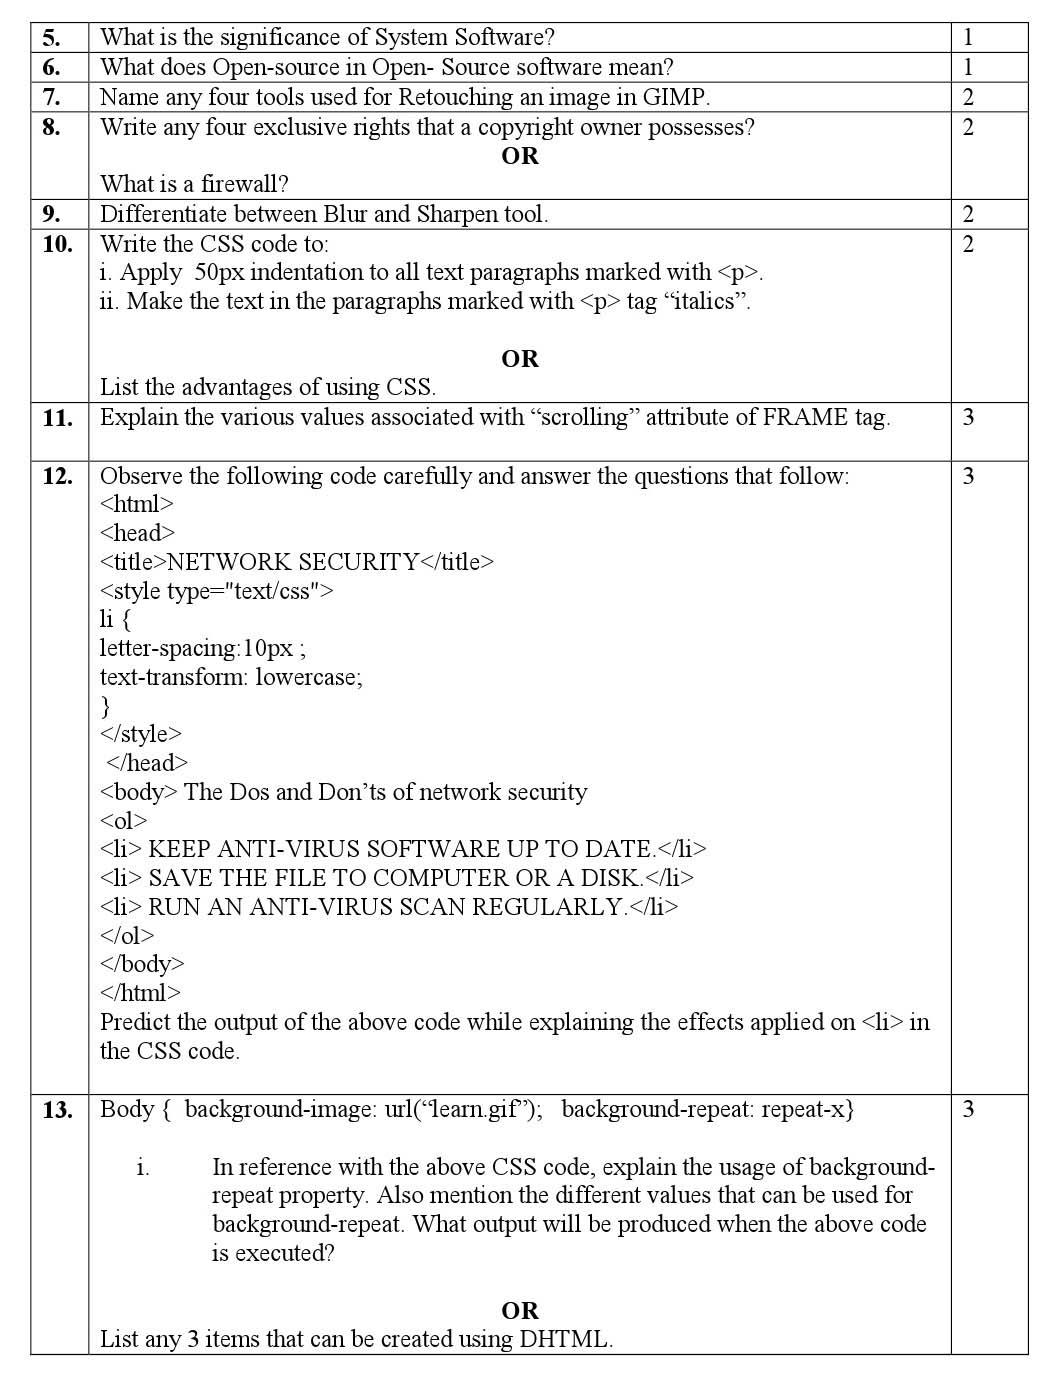 Information and Communication Technology CBSE Class X Sample Question Paper 2018 19 - Image 2